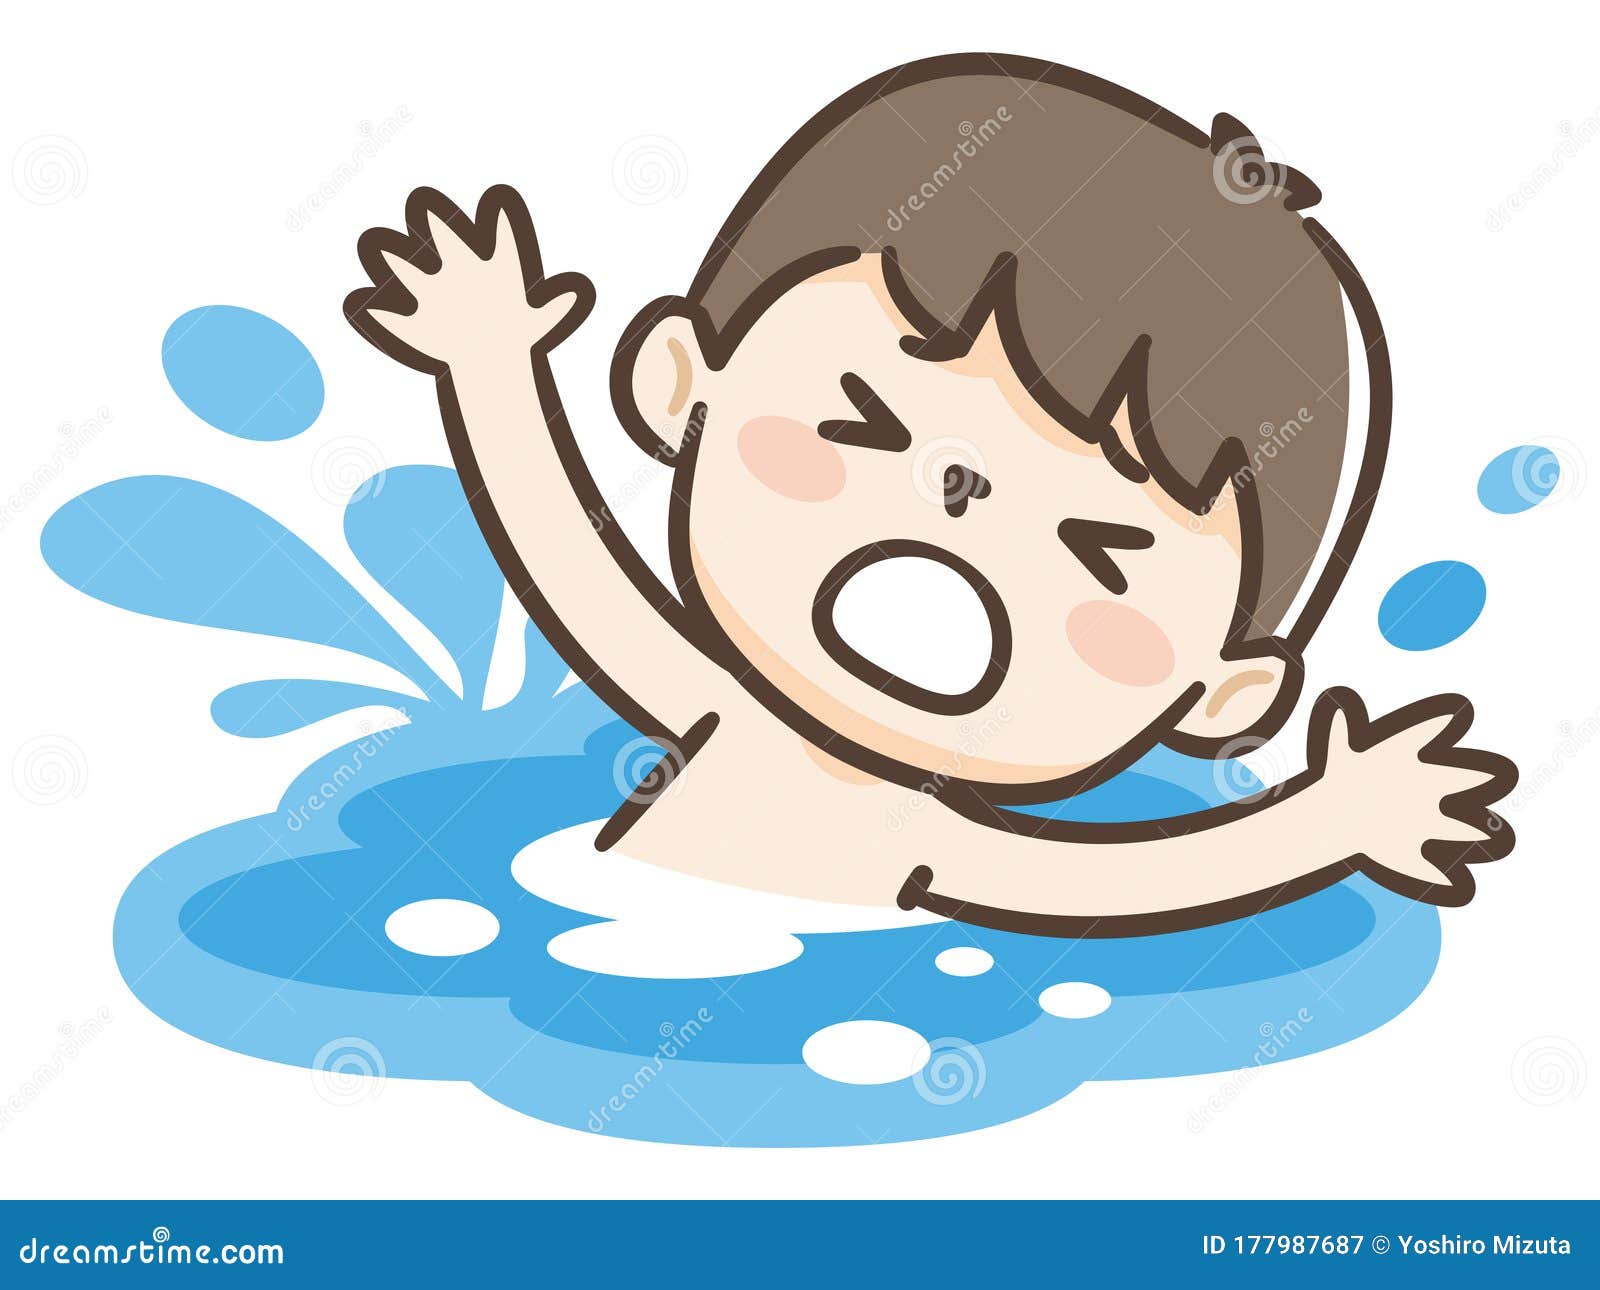 Young Boy Drowning in Water. Emergency Situation, Accident Concept ...